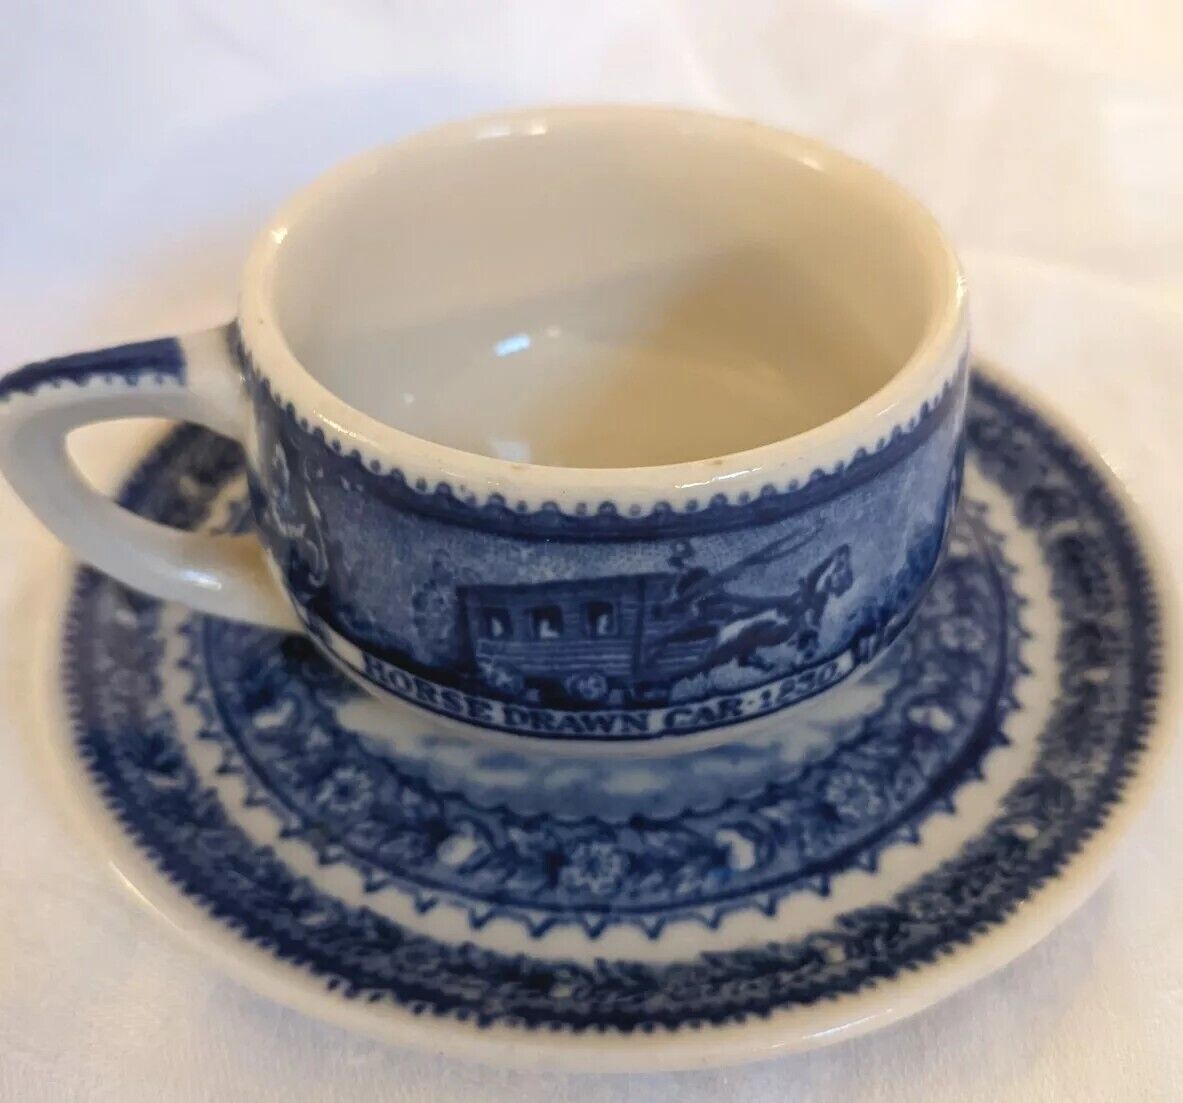 B&O Railroad Scammell\'s Lamberton China Demitasse Cup and Saucer